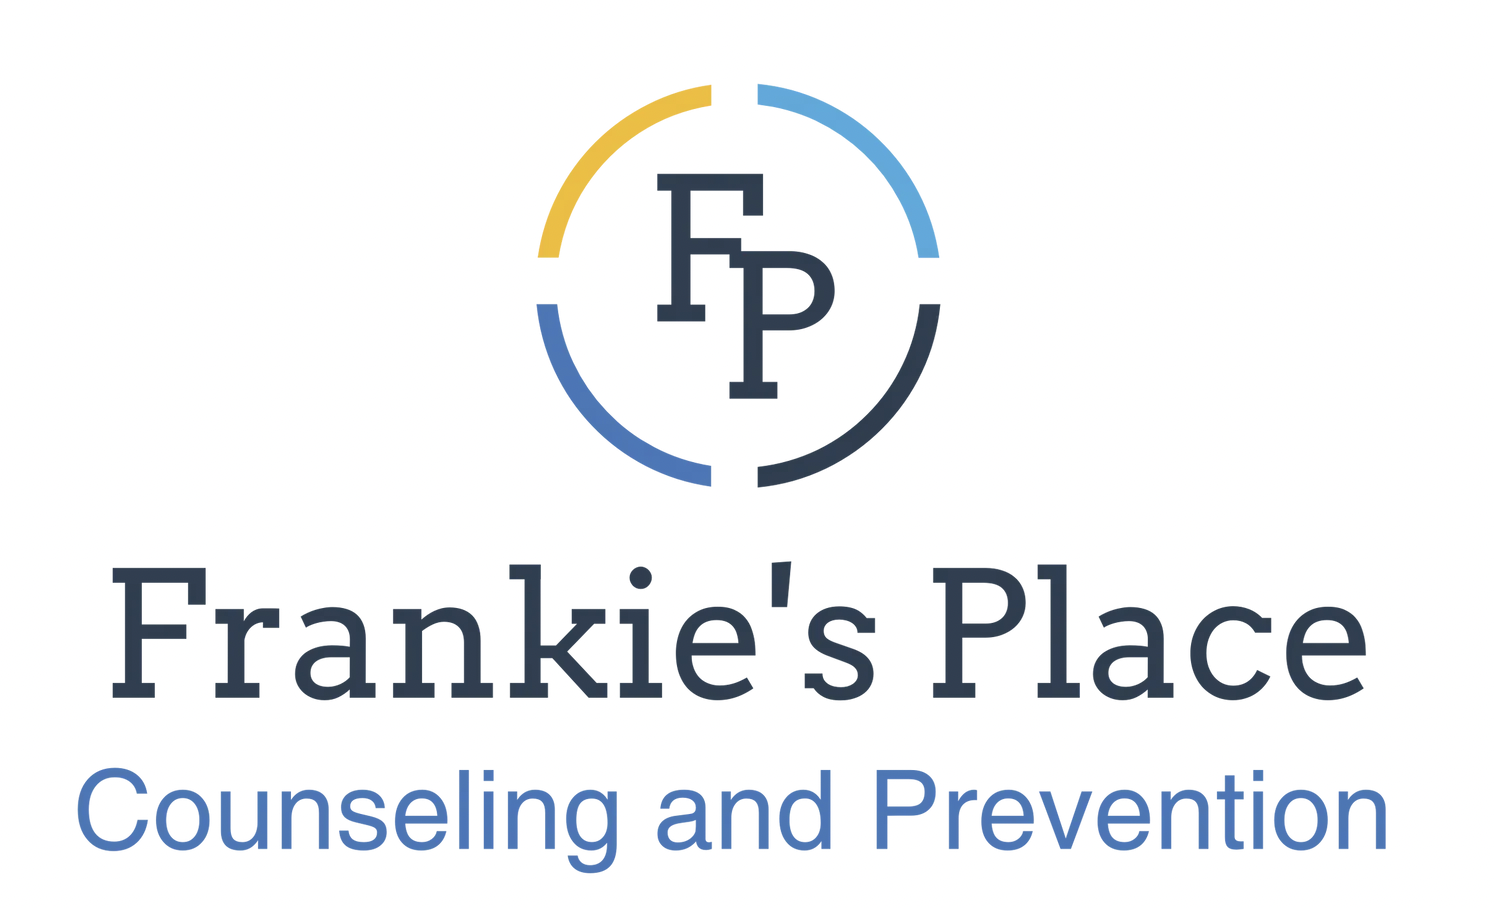 Frankies Place Counseling and Prevention Services logo